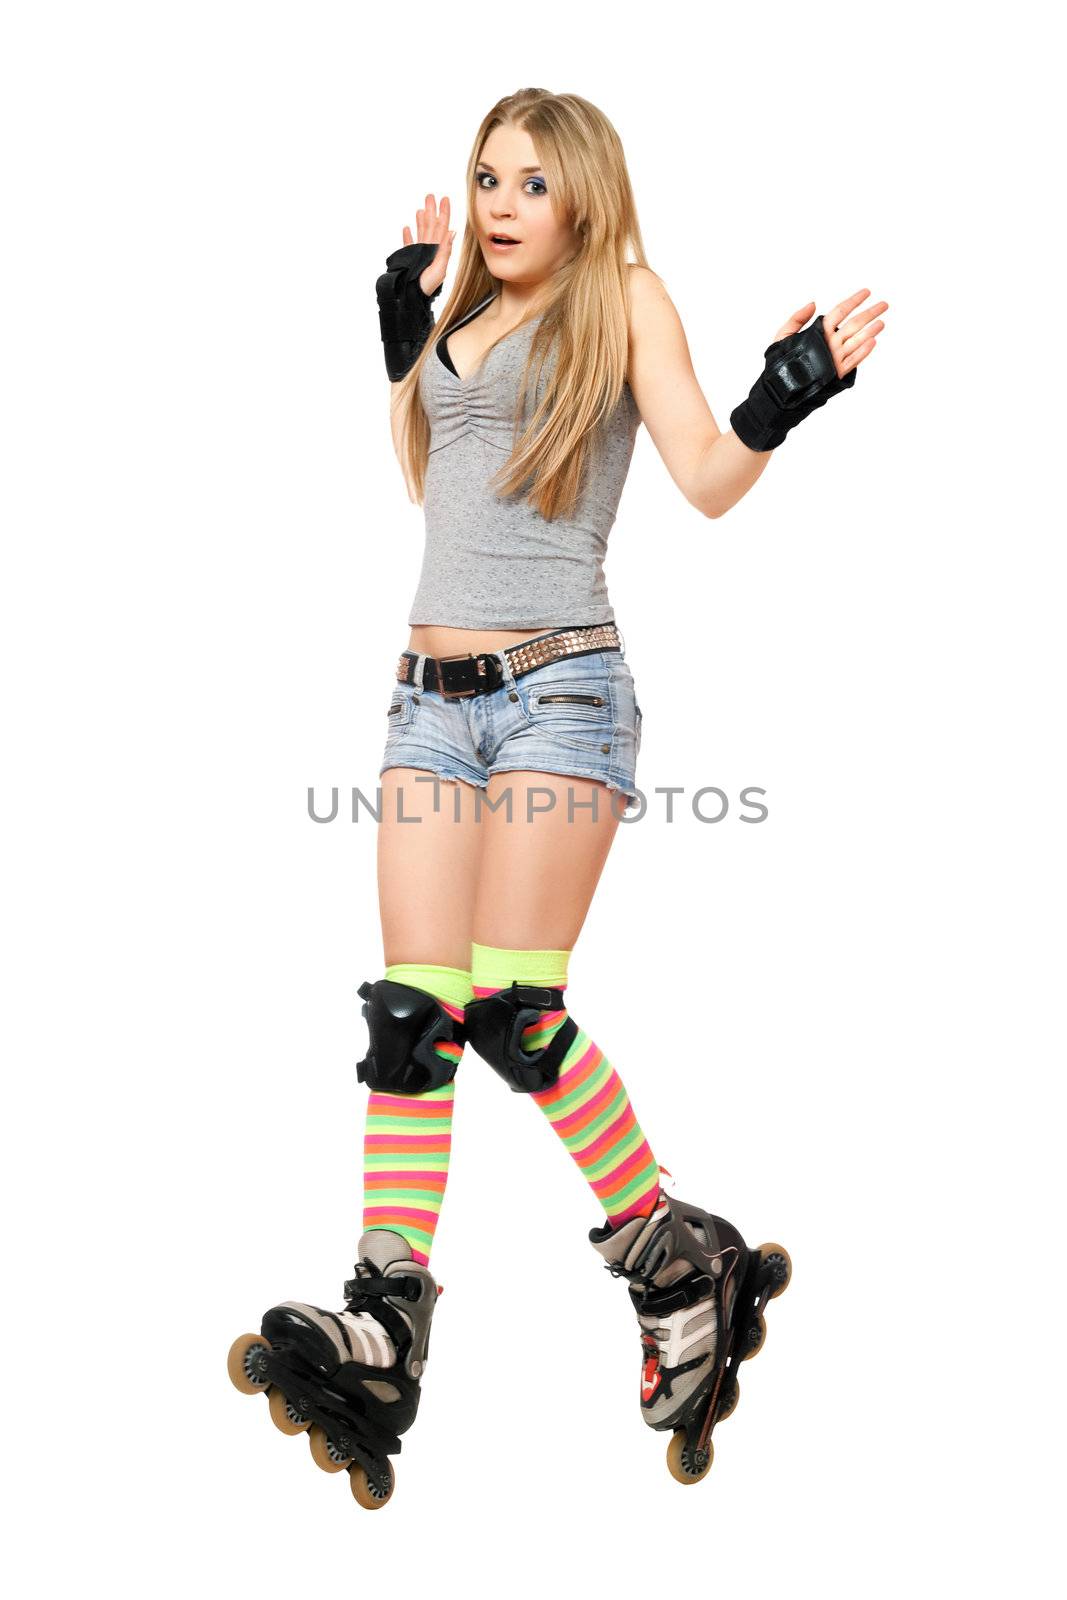 Scared young woman tries to keep his balance on roller skates